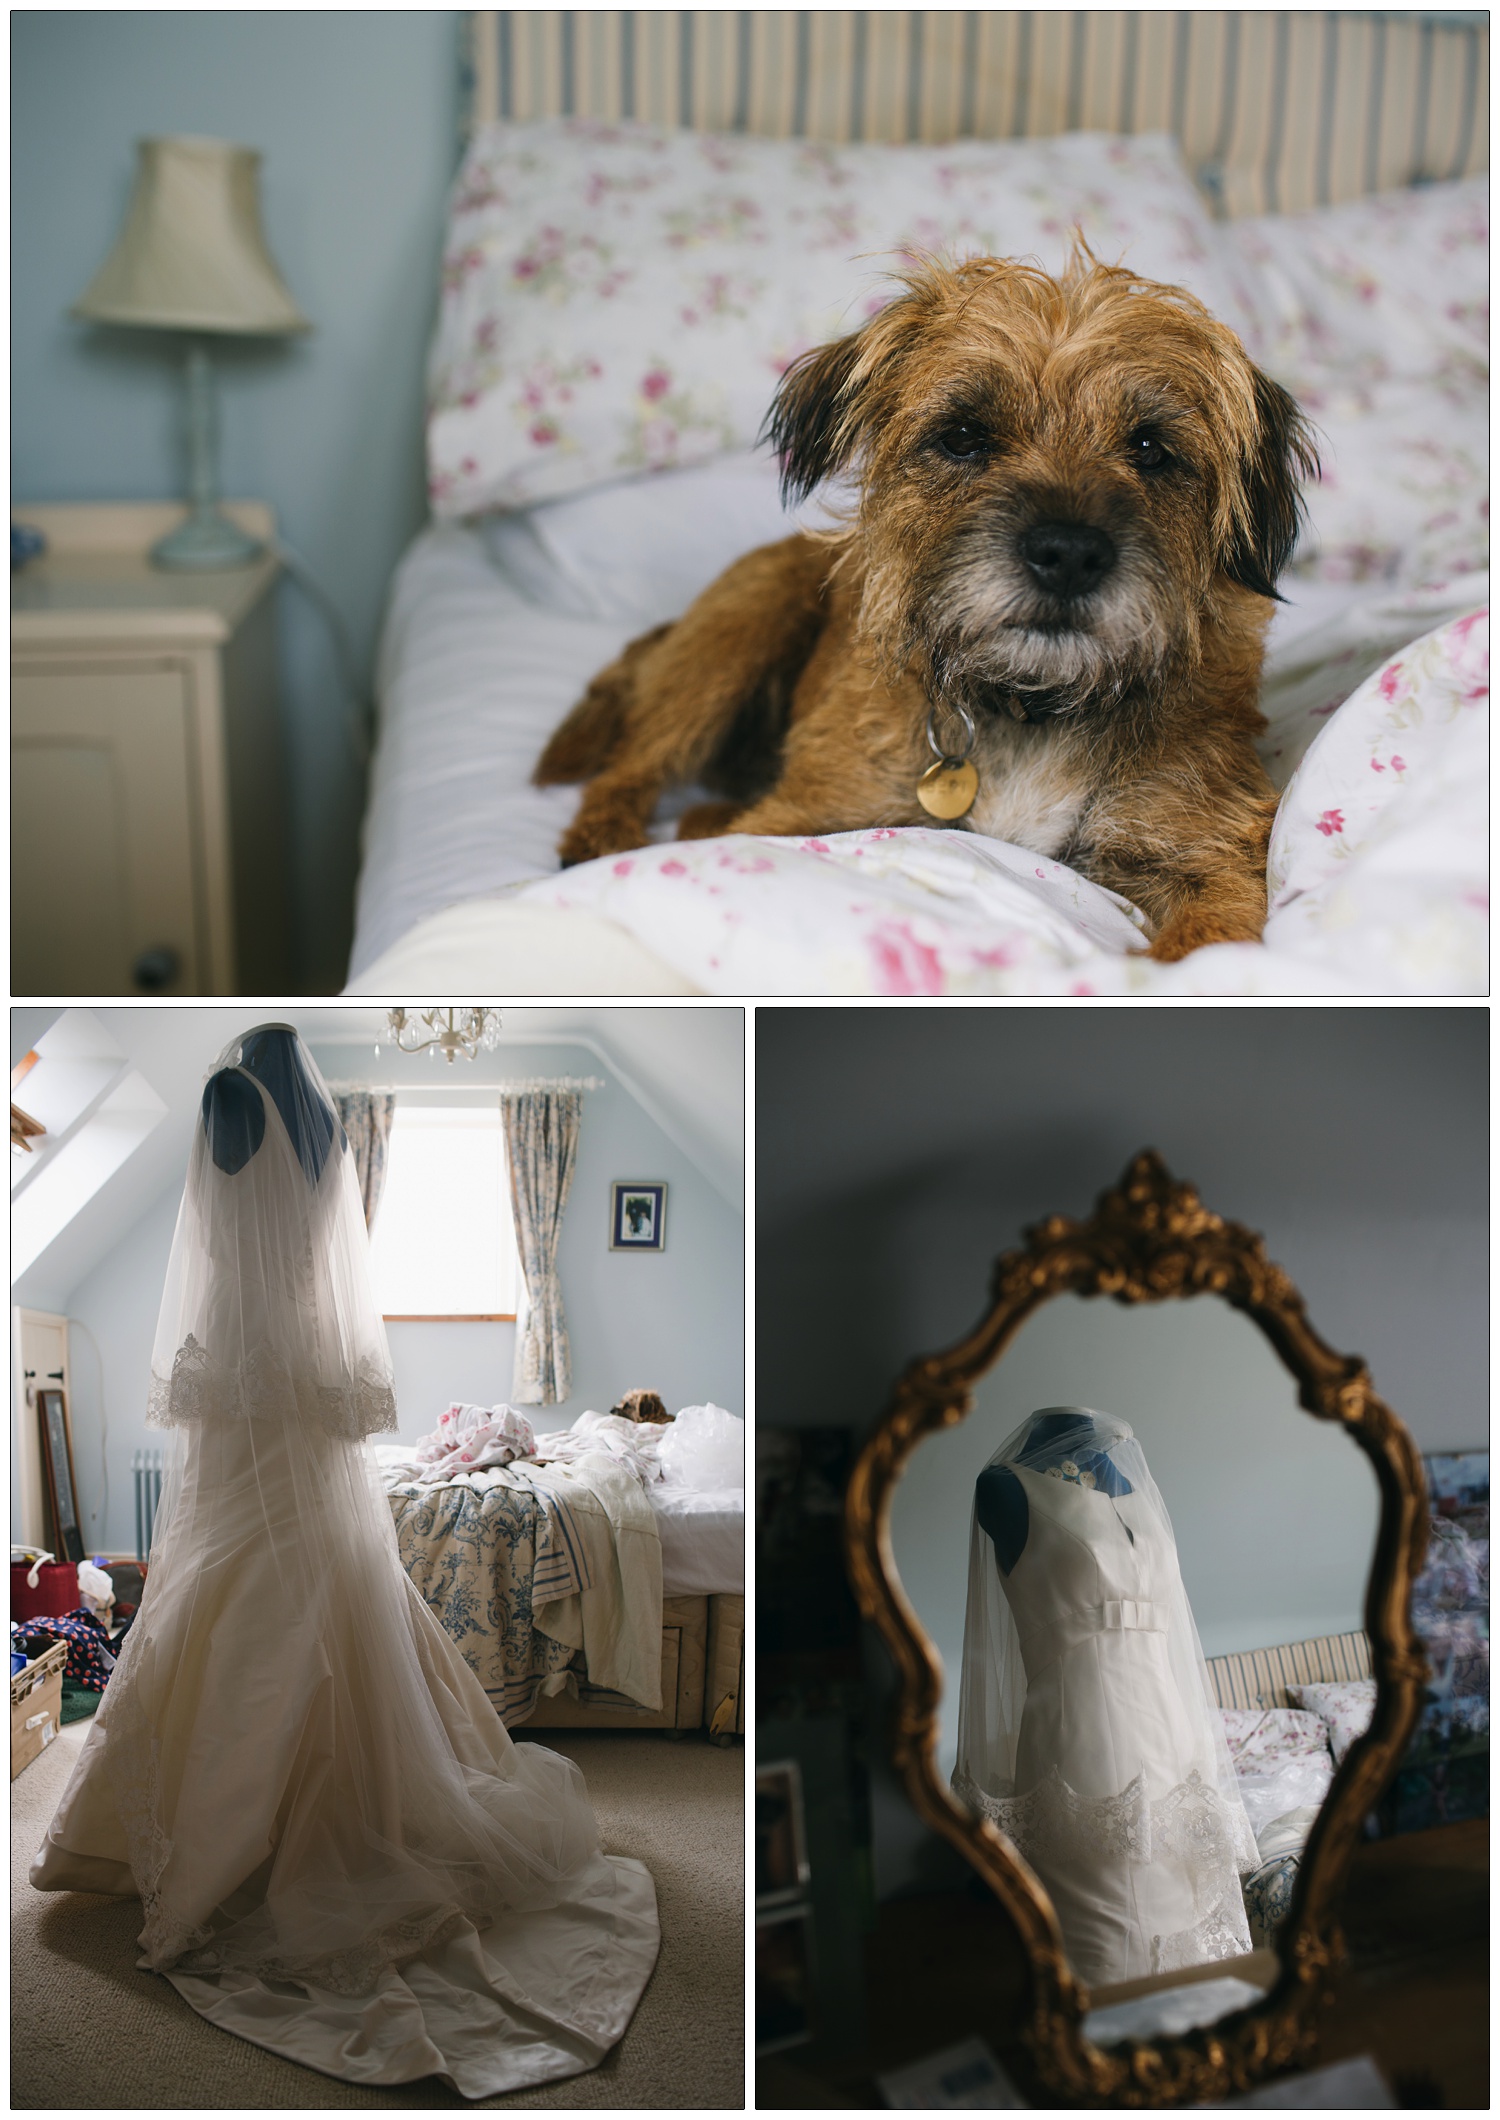 A dog sits on a bed. A wedding dress is on a mannequin, and reflected in the mirror.